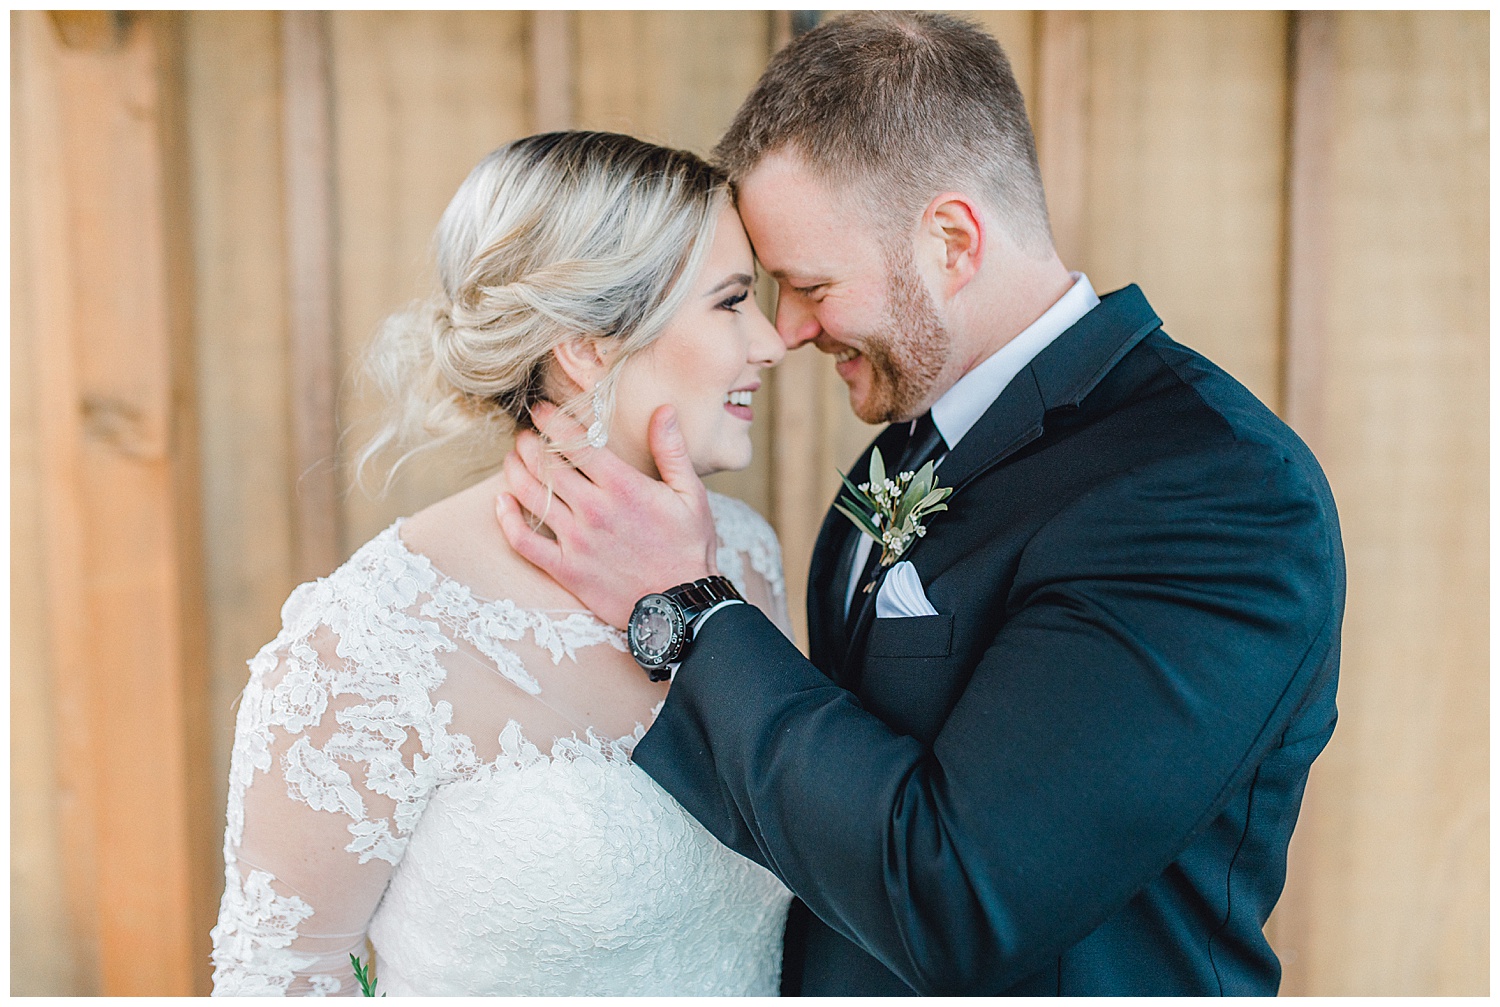 ERC-7162_A beautiful winter wedding in Snohomish, Washington at Thomas Family Farm was simply perfect.  This rustic and modern styled wedding was dripping with romance and photographed by Emma Rose Company, a pacific northwest wedding photographer..jpg